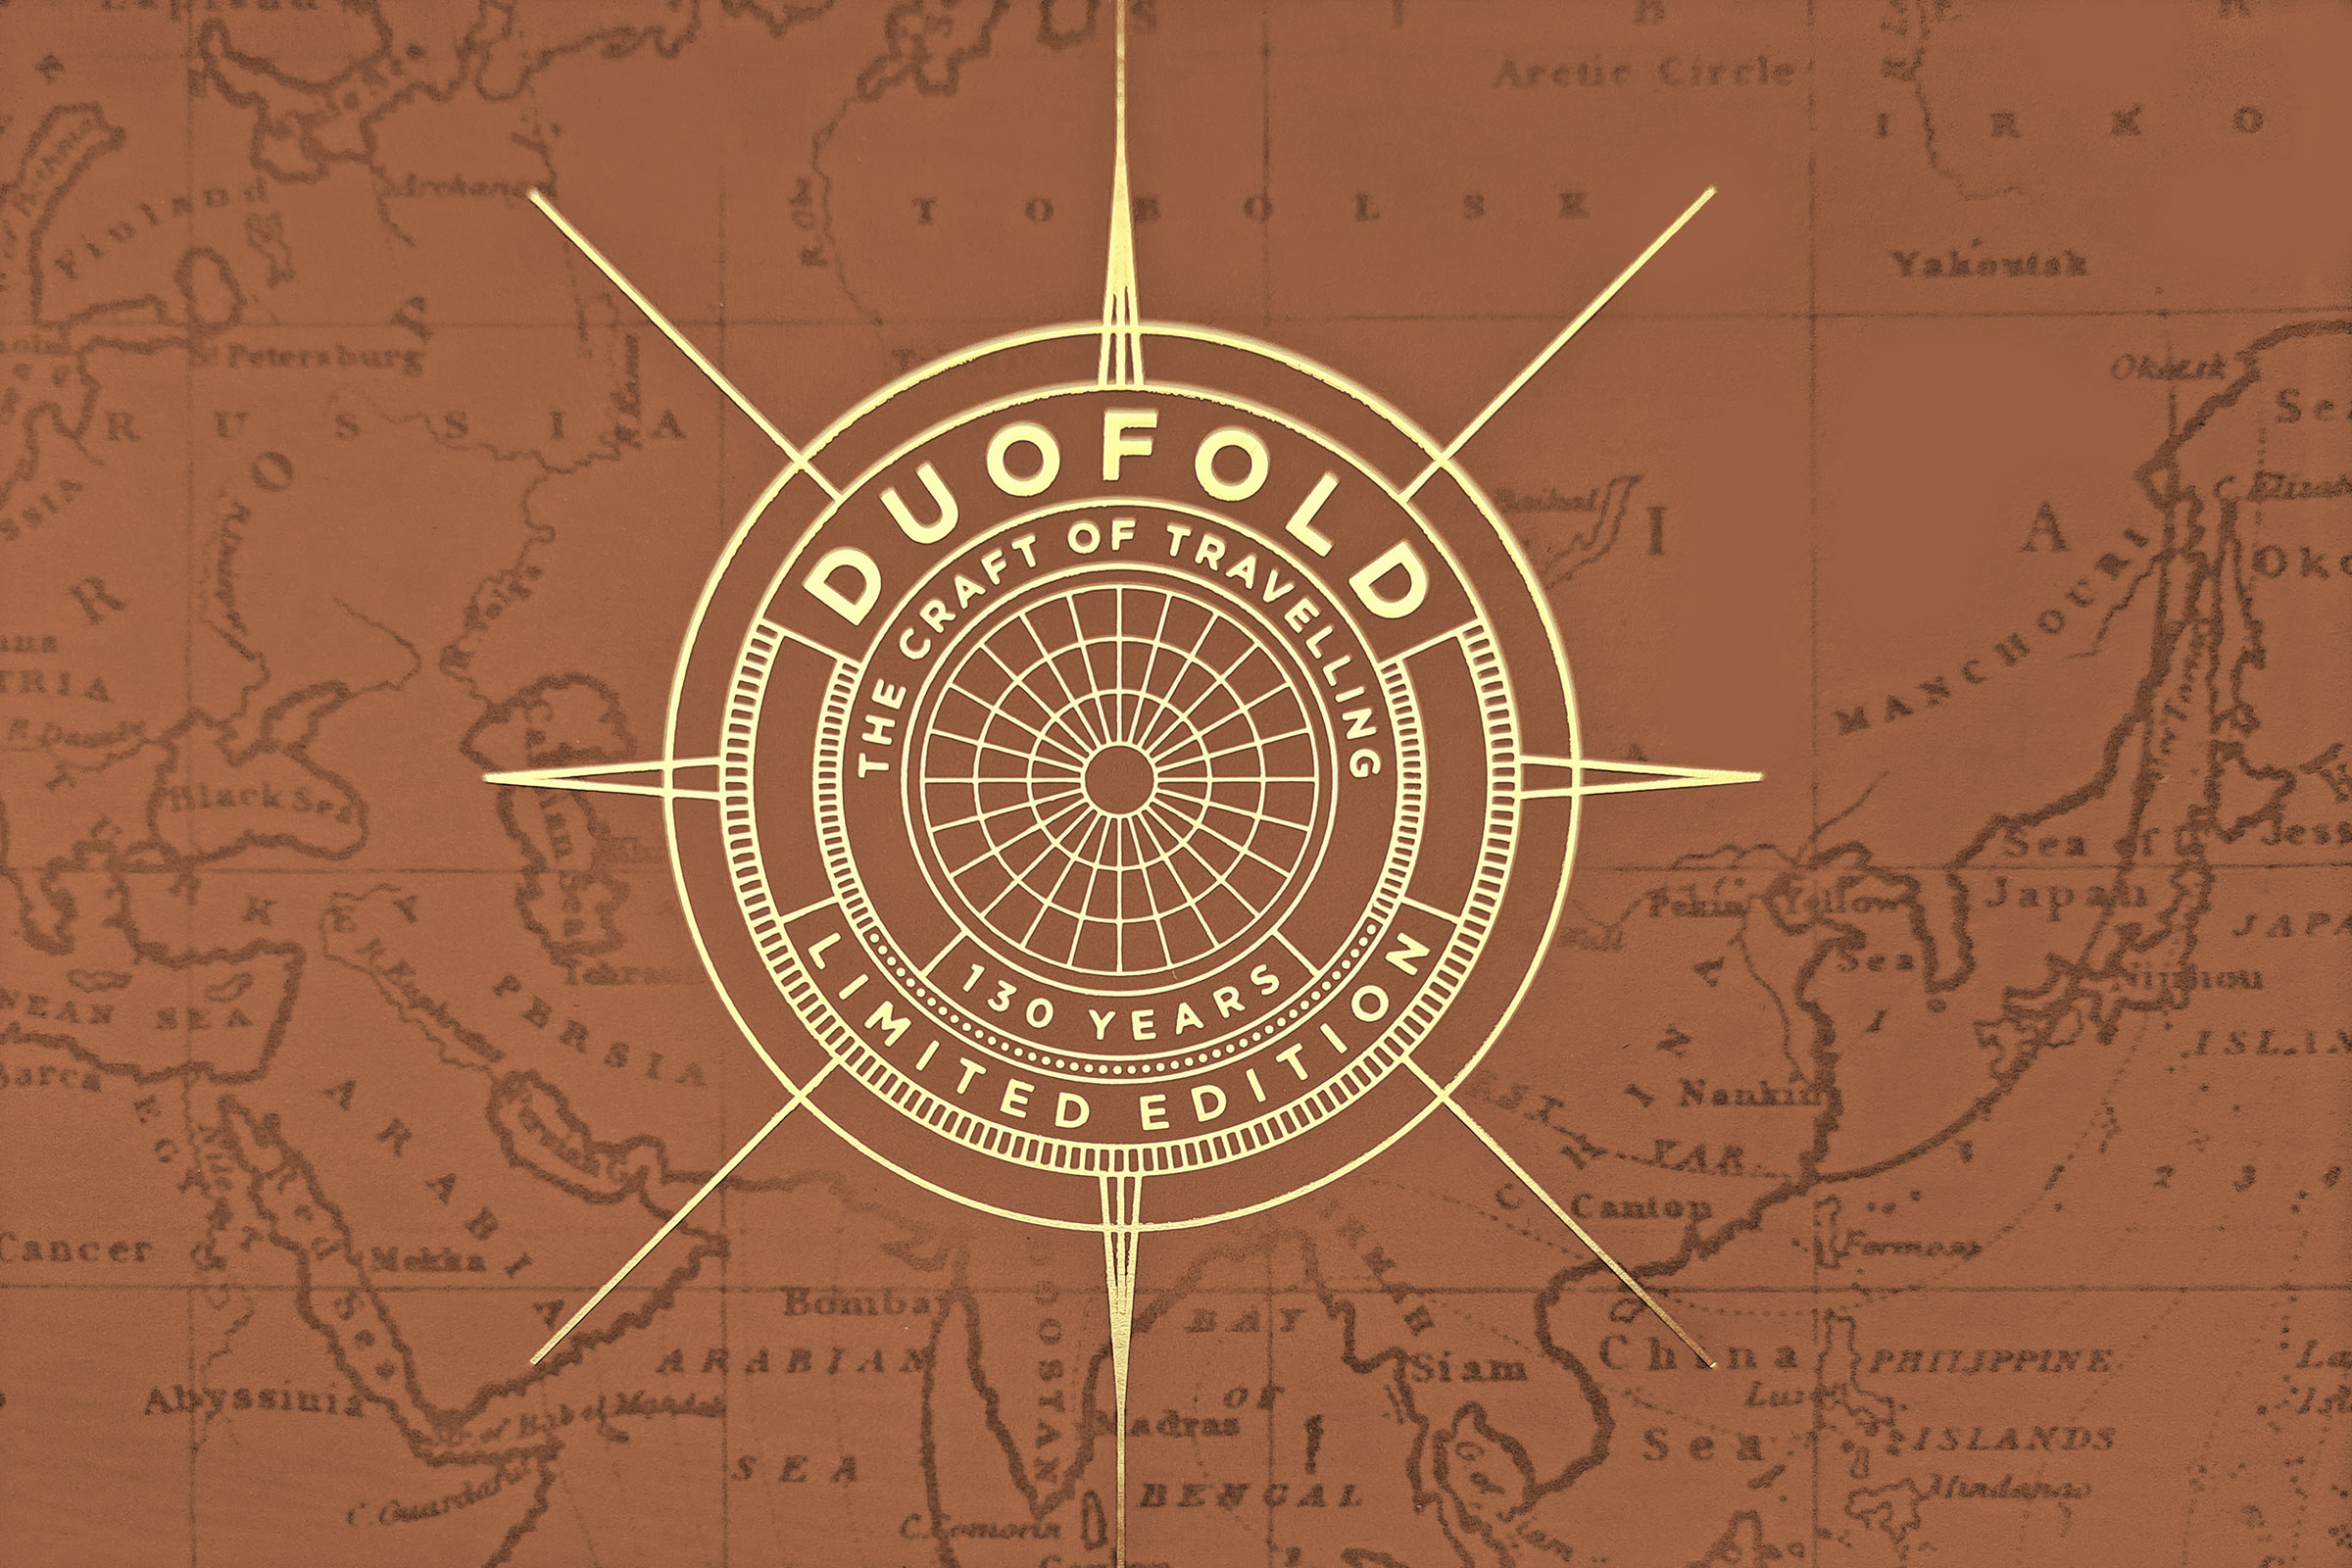 Duofold The Craft of Travelling 130 Years